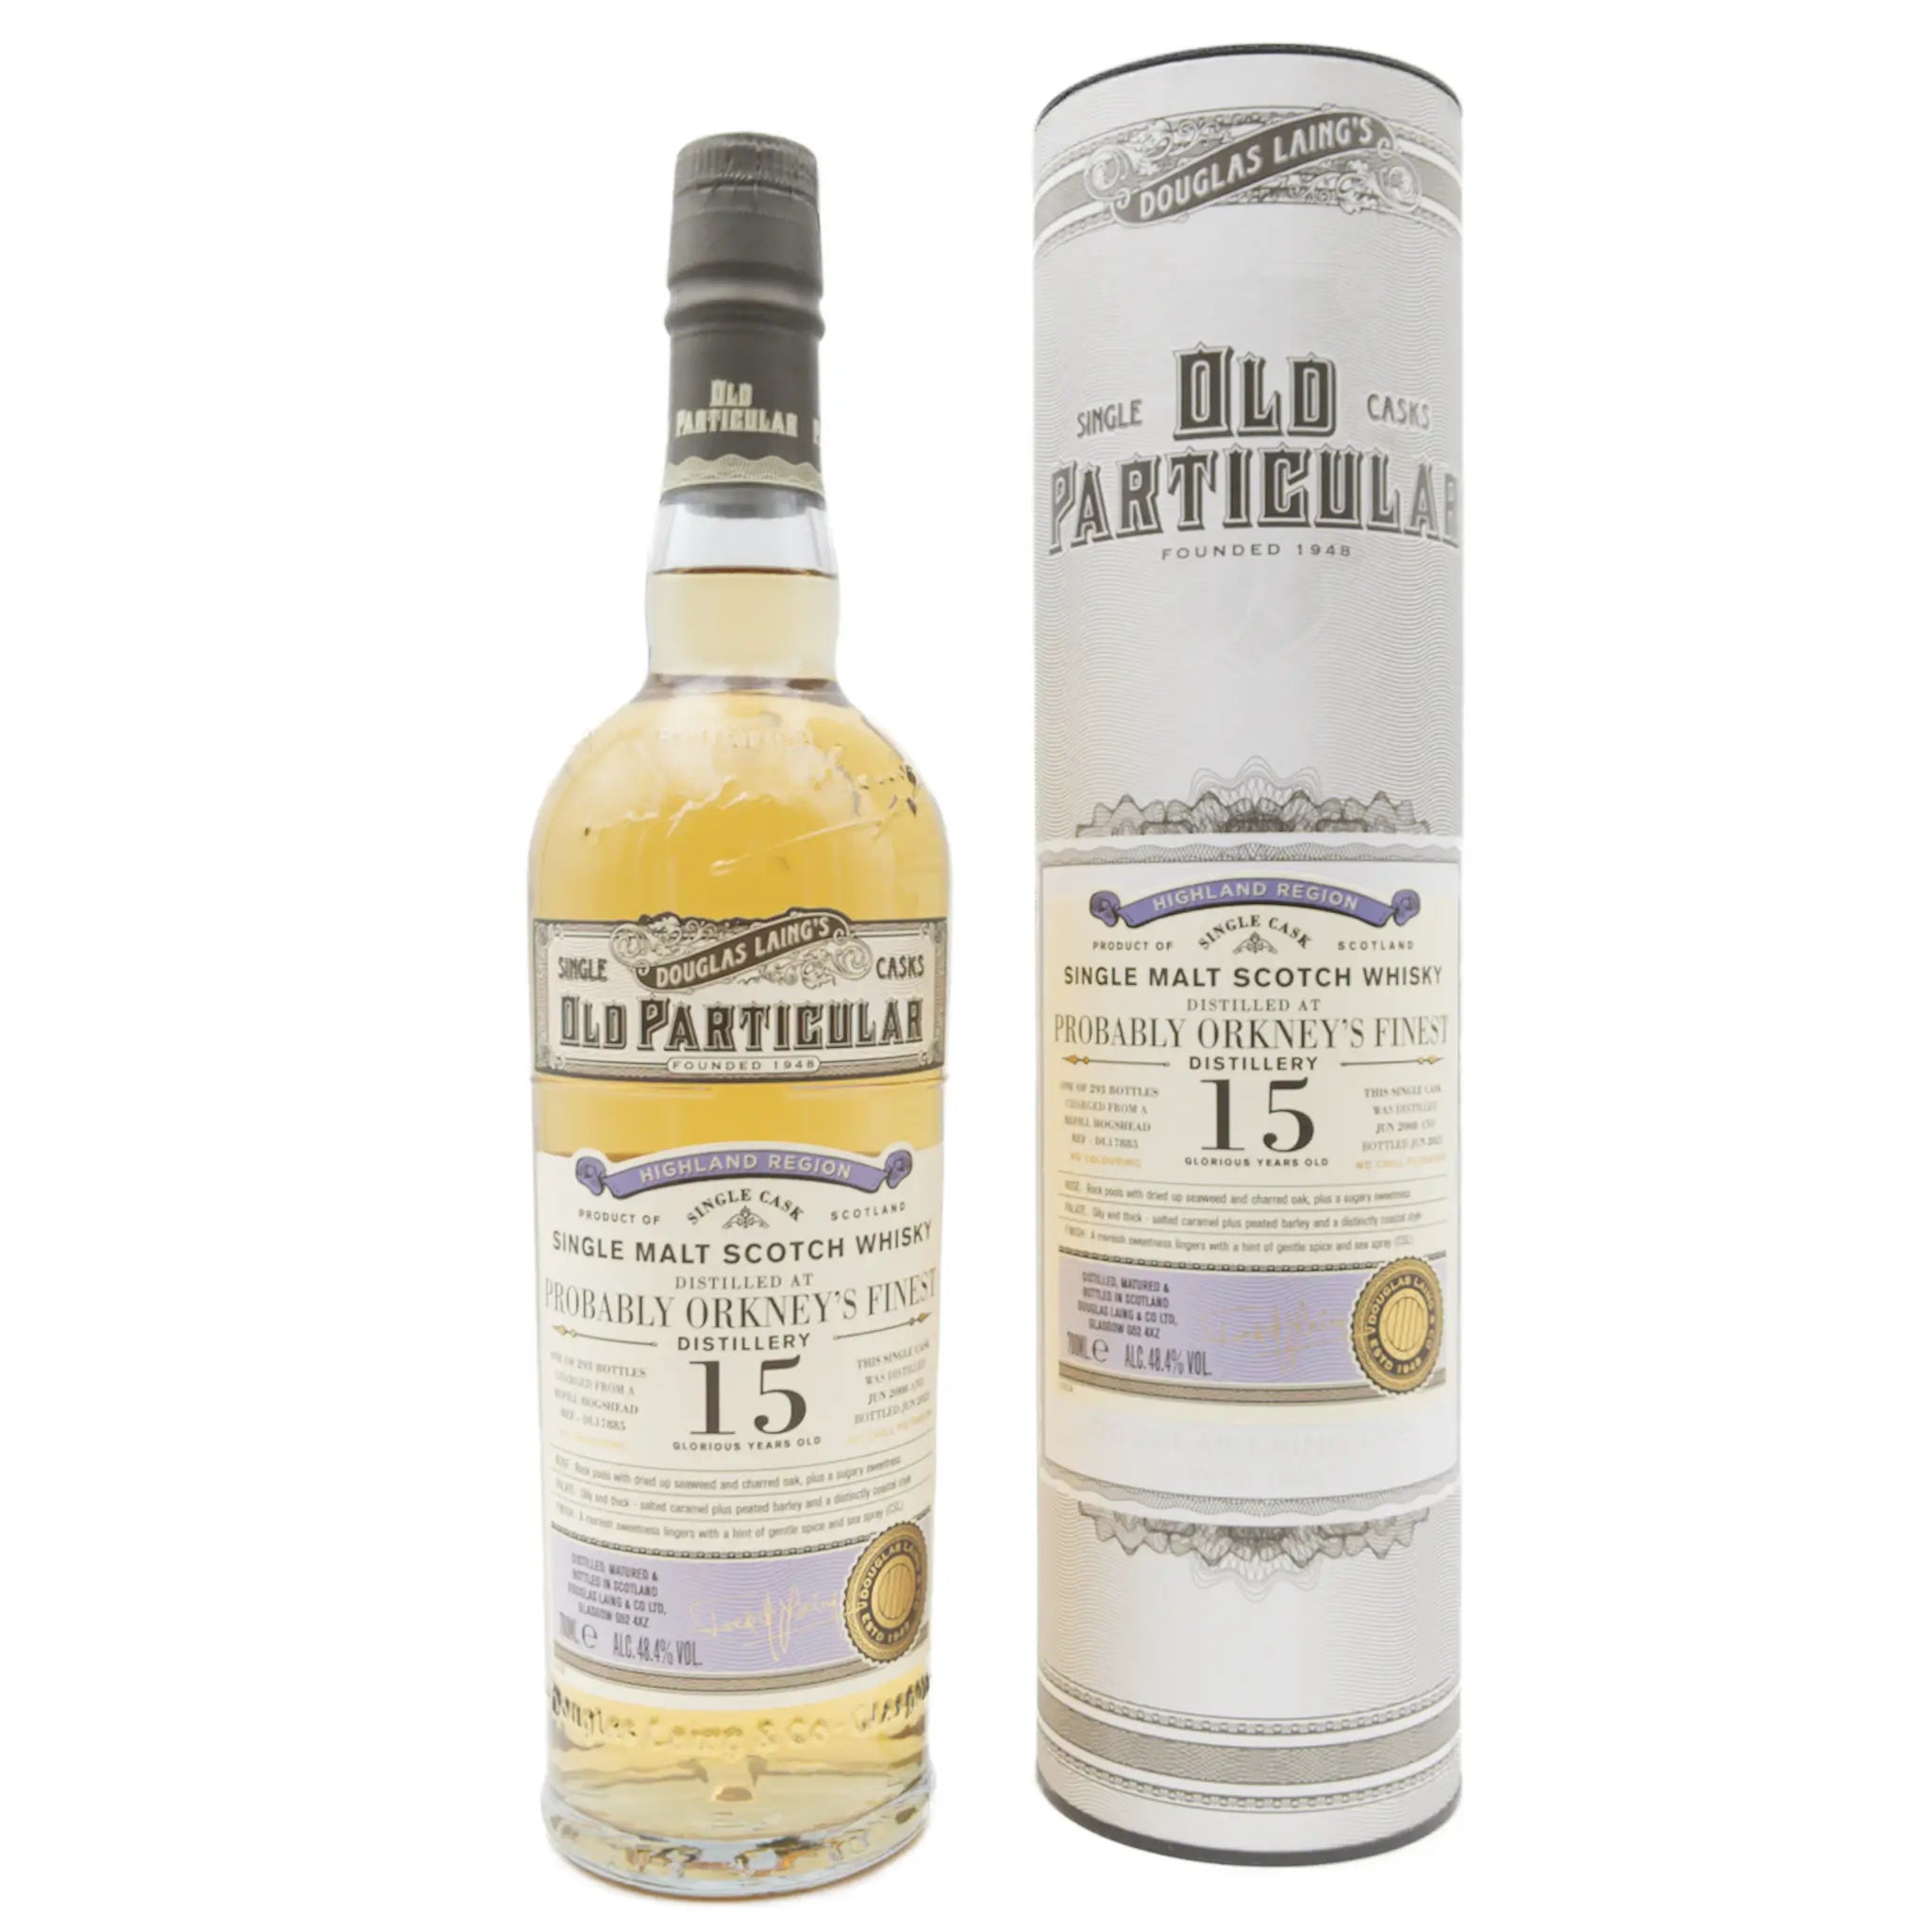 Probably Orkney's Finest Old Particular 15 Jahre 2008/2023 Douglas Laing Whisky